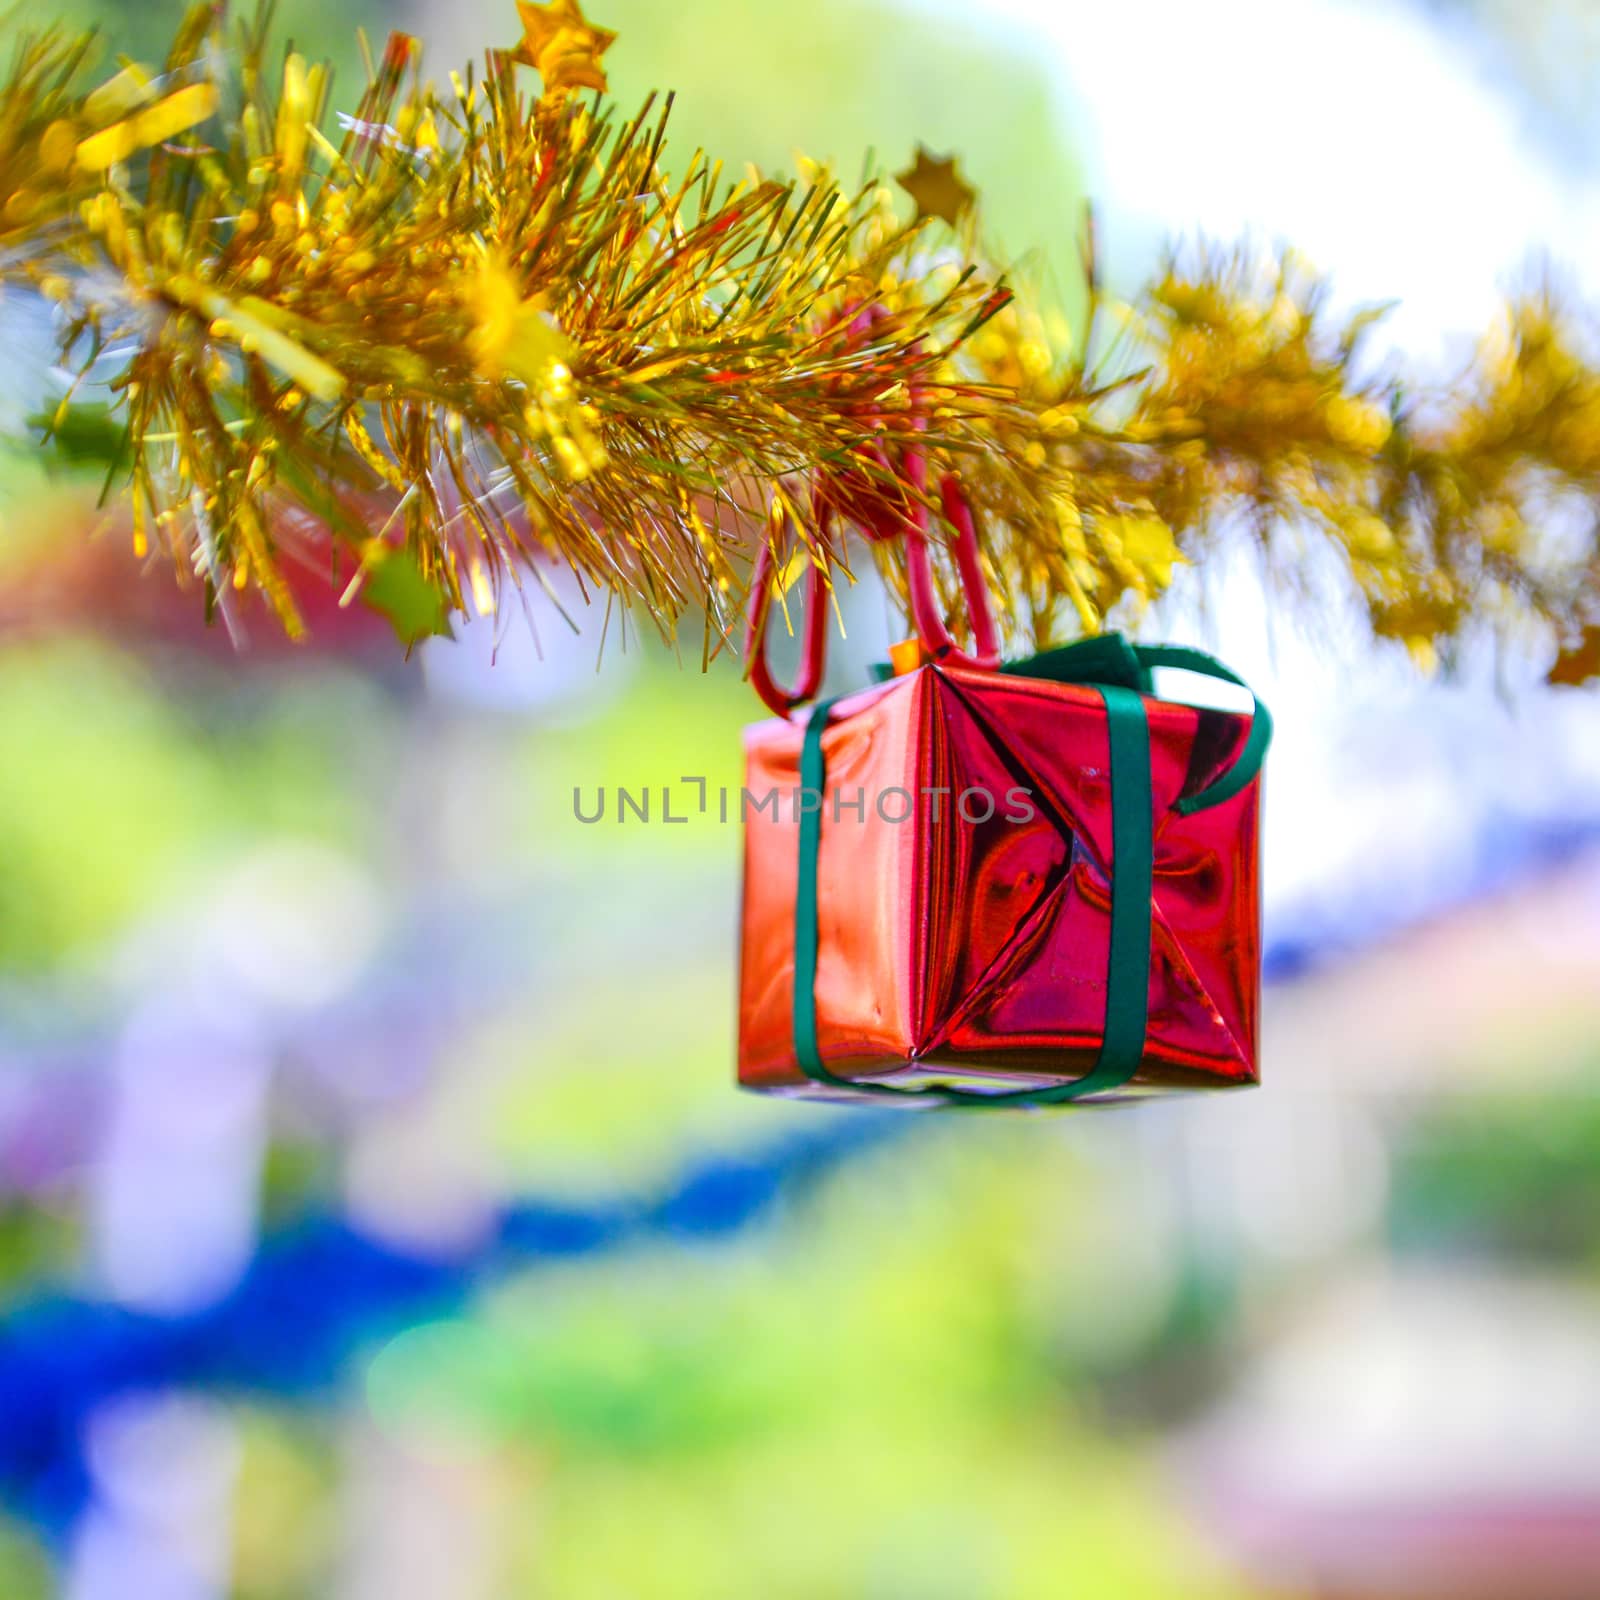 Closeup red gift box, christmas ornament hanging on tree